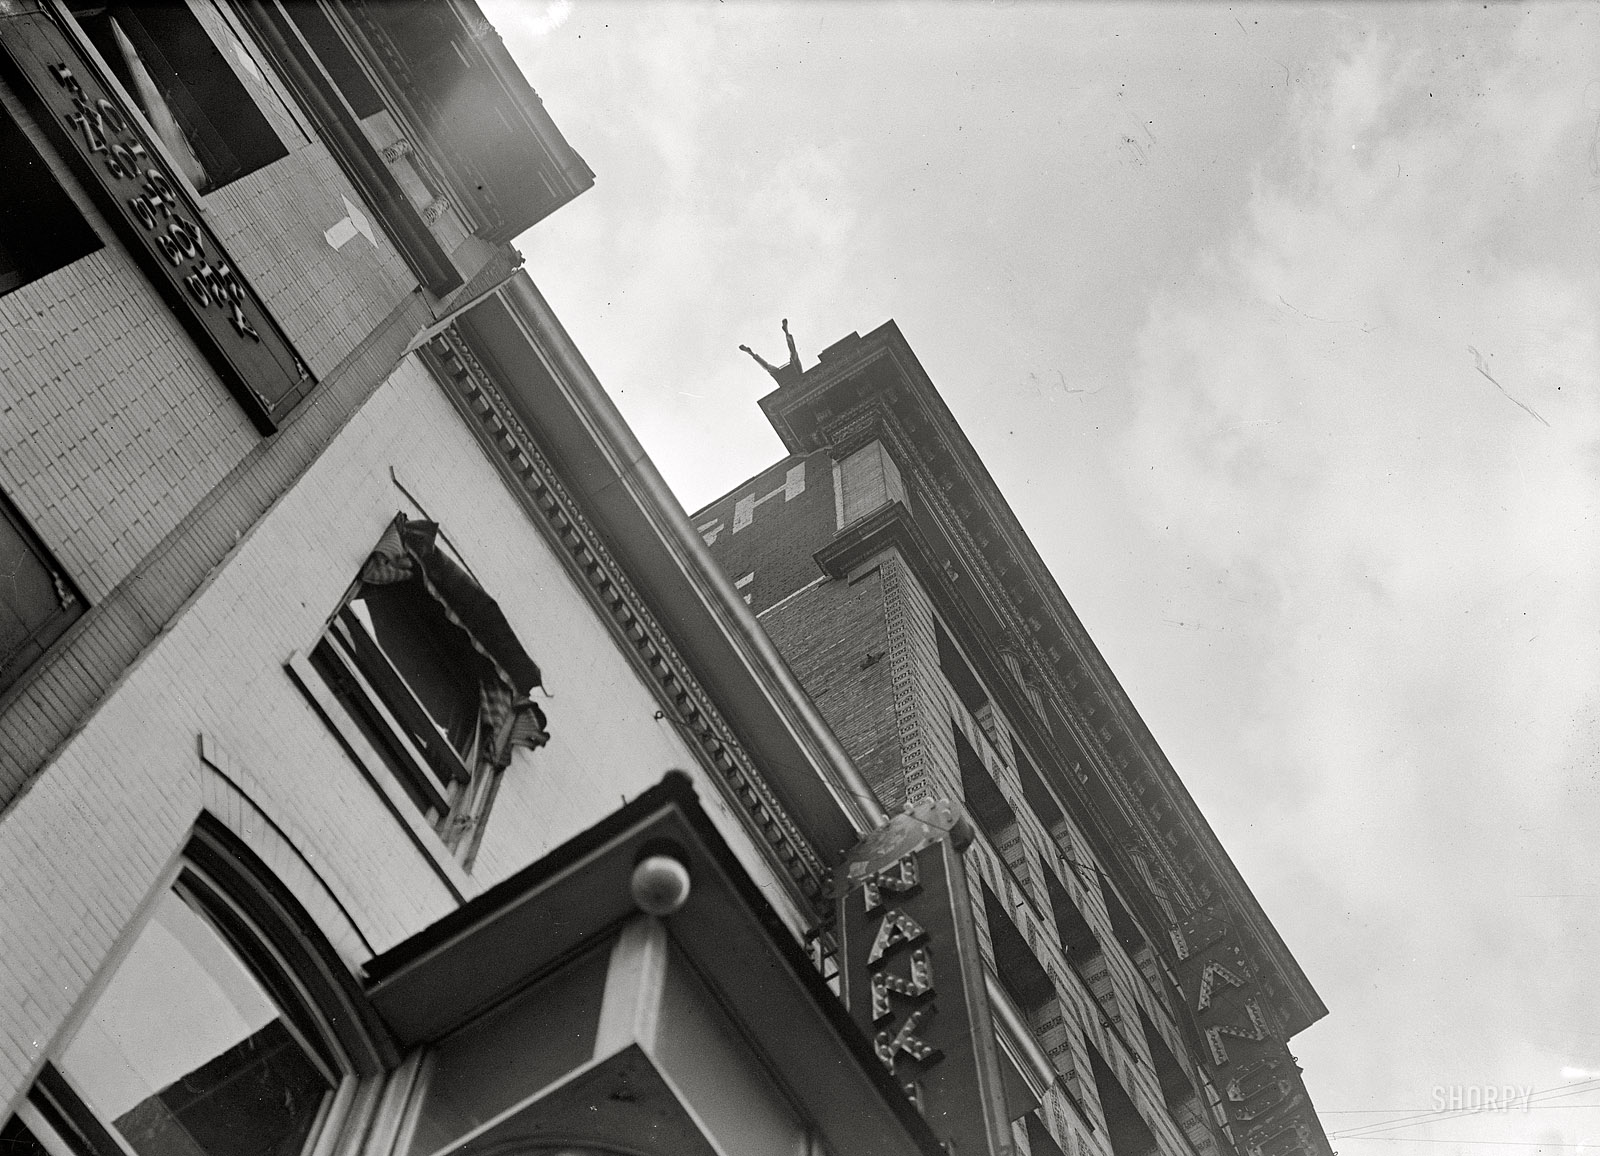 Washington, 1917. "J. Reynolds, performing acrobatic and balancing acts on high cornice above 9th Street N.W." Harris & Ewing glass negative. View full size.